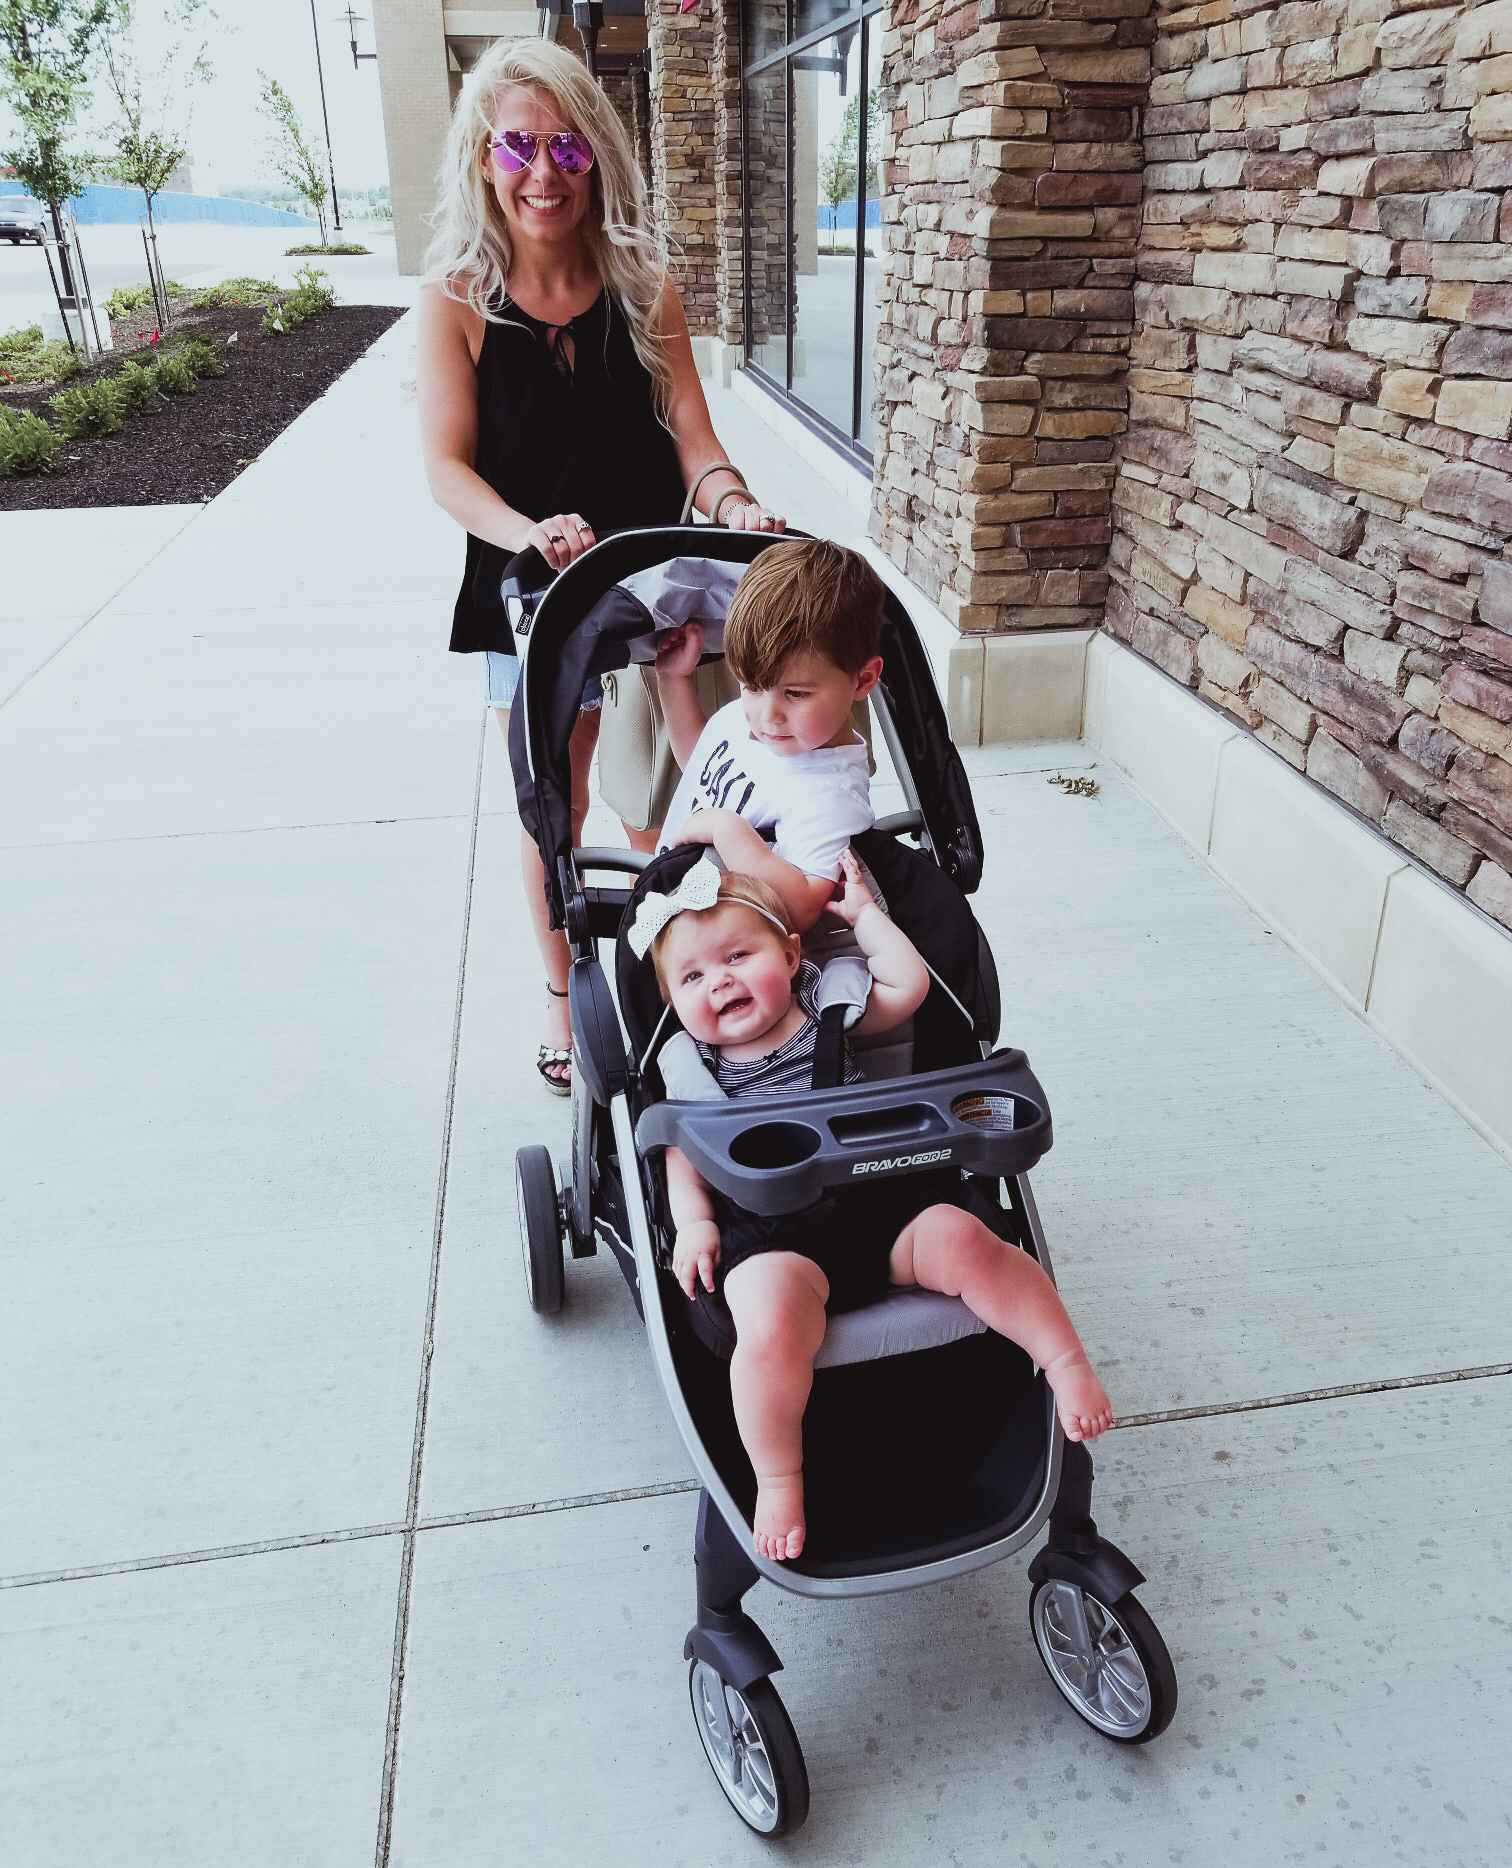 Chicco BravoFor2 Double Stroller Review: Our weekend recap featuring a review of the Chicco BravoFor2 Double Stroller. If you're looking for the best double stroller for 2 kids, you'll want to check out this review. The Chicco Bravo for 2 is a top tandem double stroller and perfect for your family's weekend adventures!